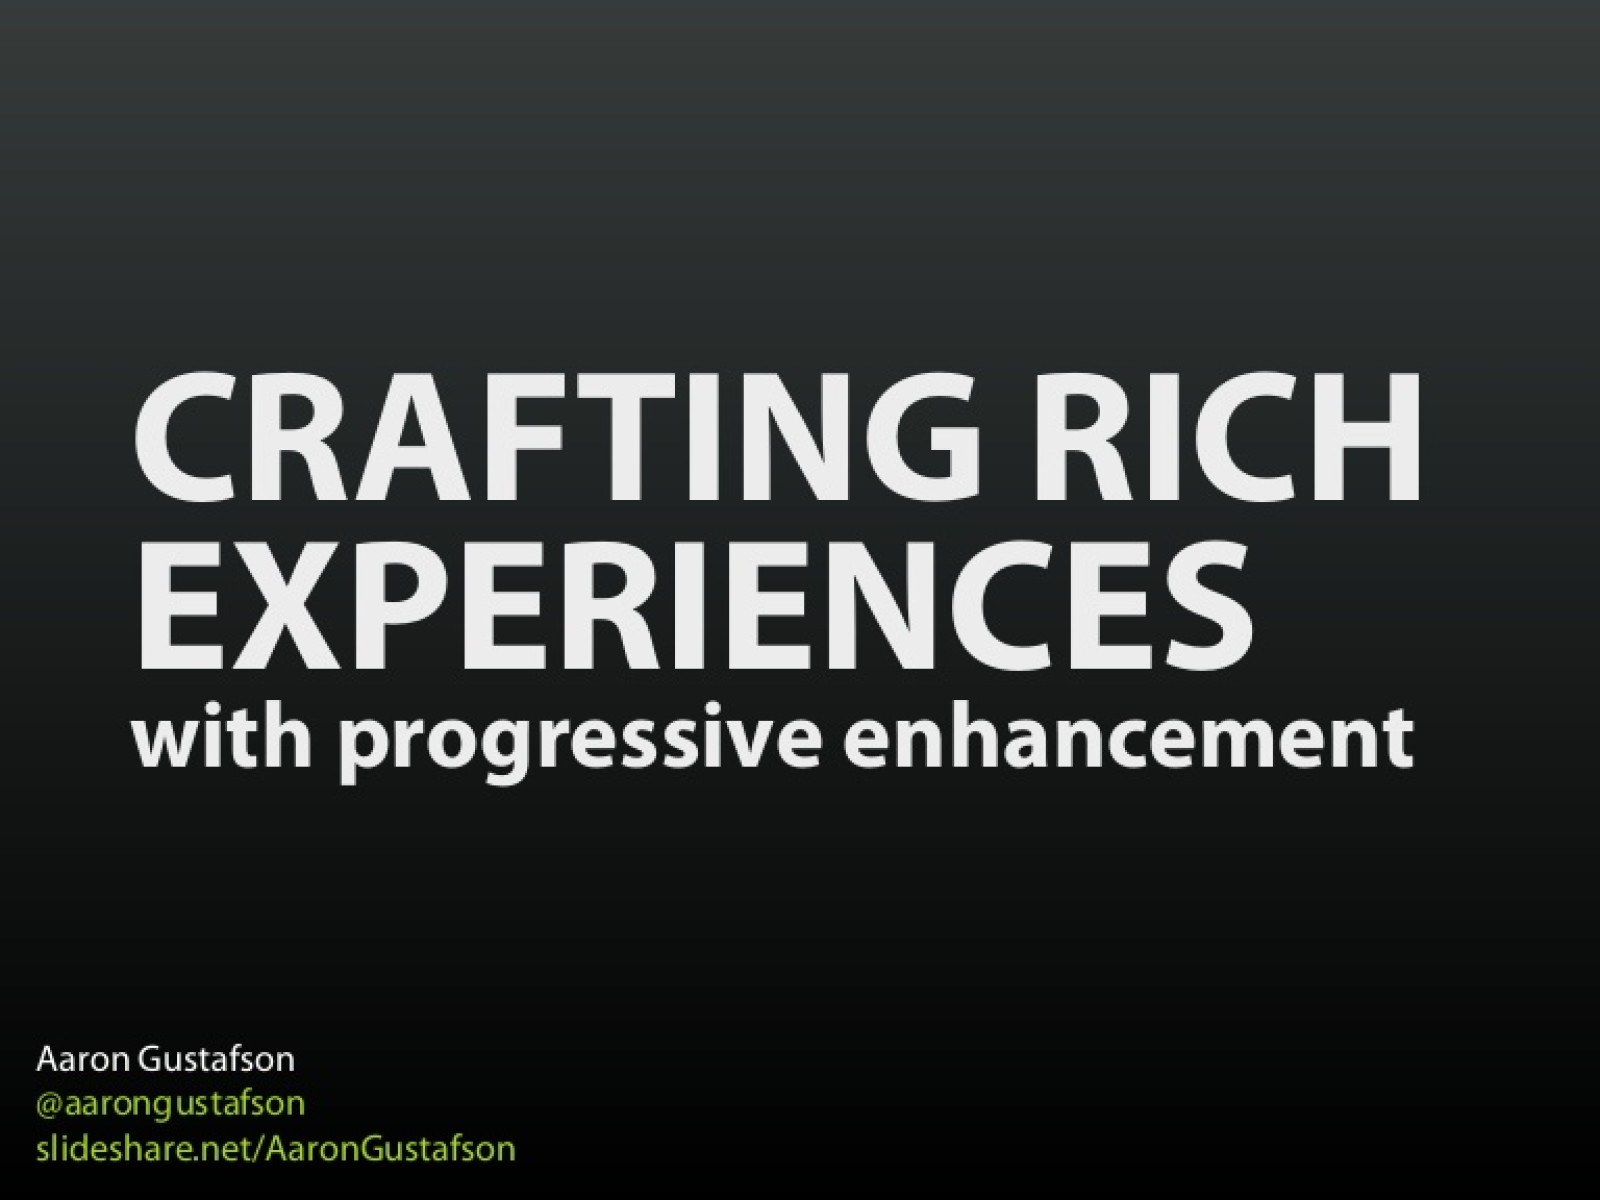 Crafting Rich Experiences with Progressive Enhancement